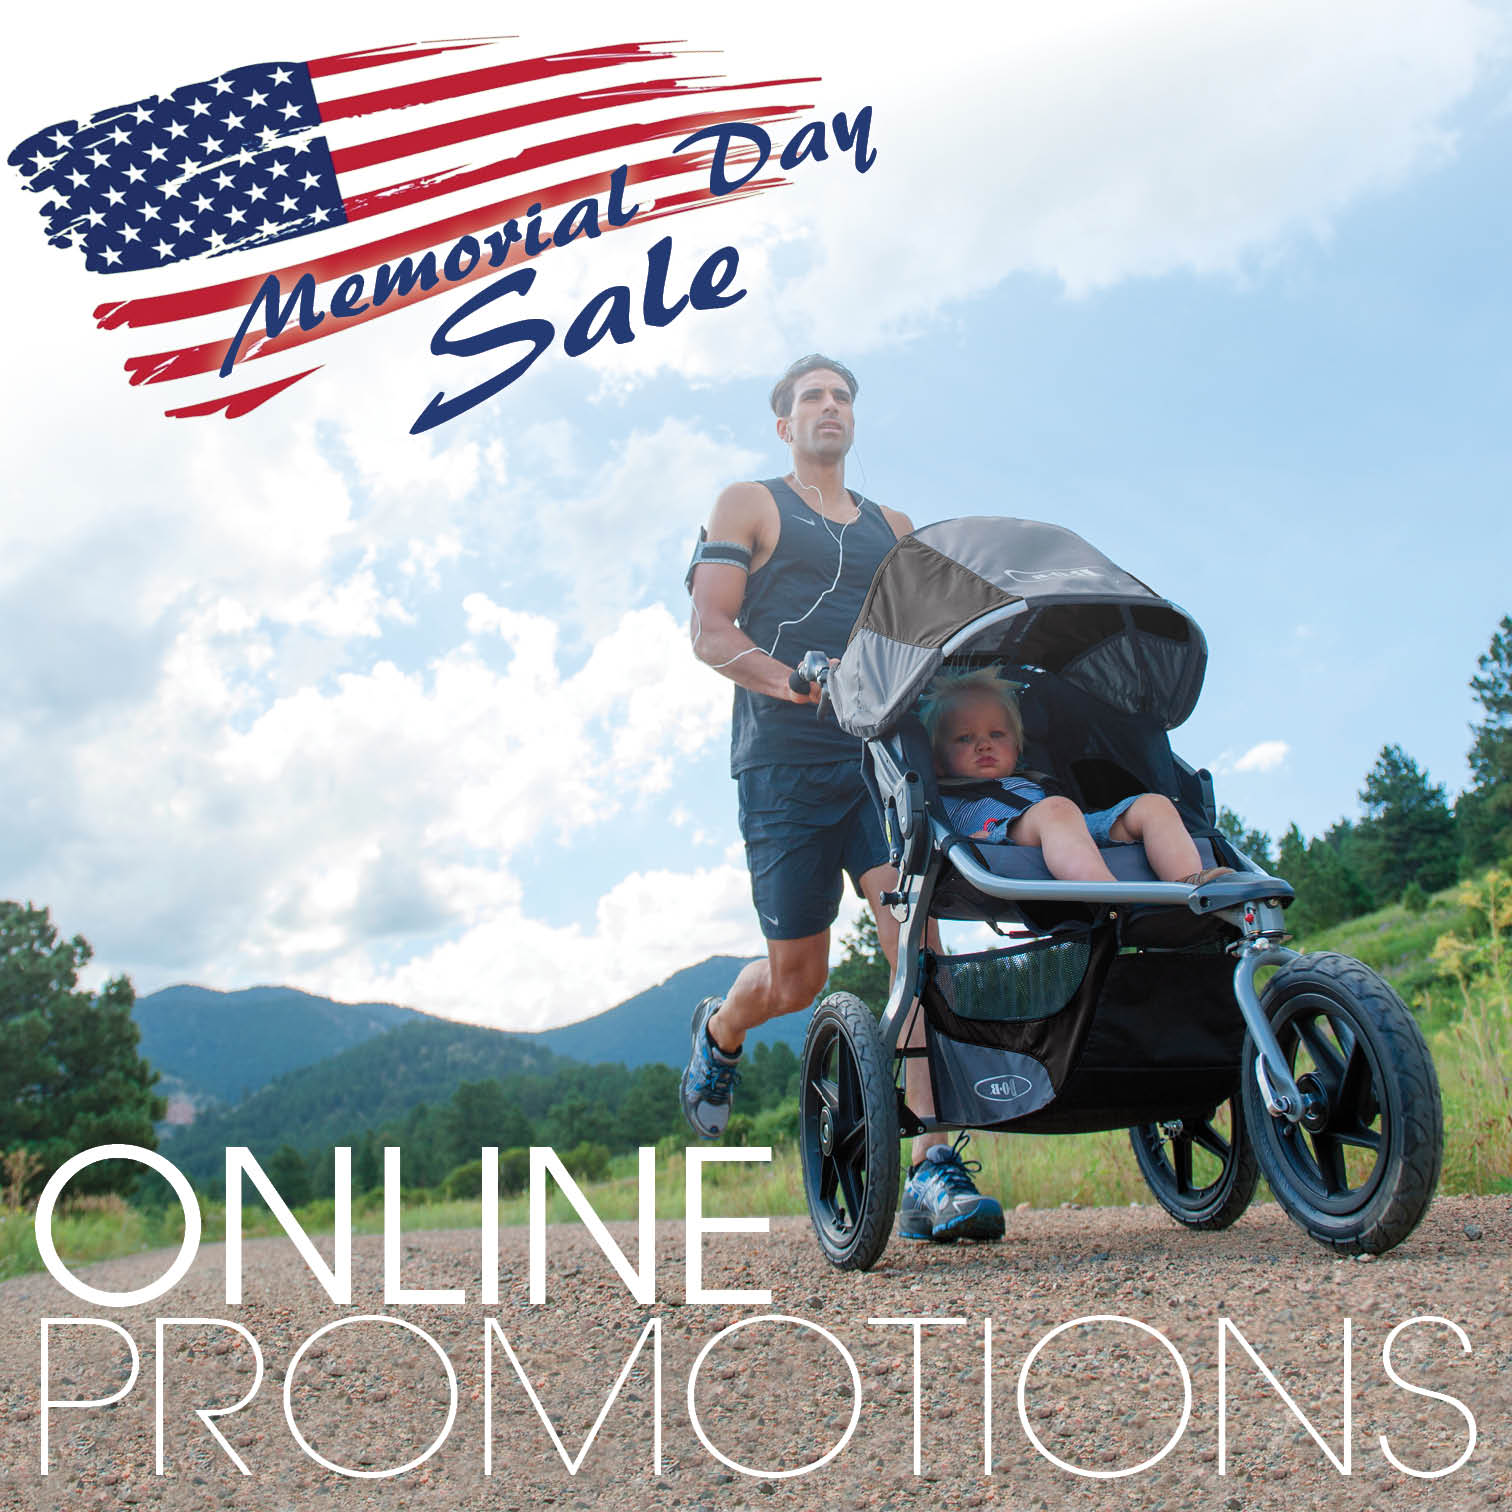 link to online promotions for memorial day